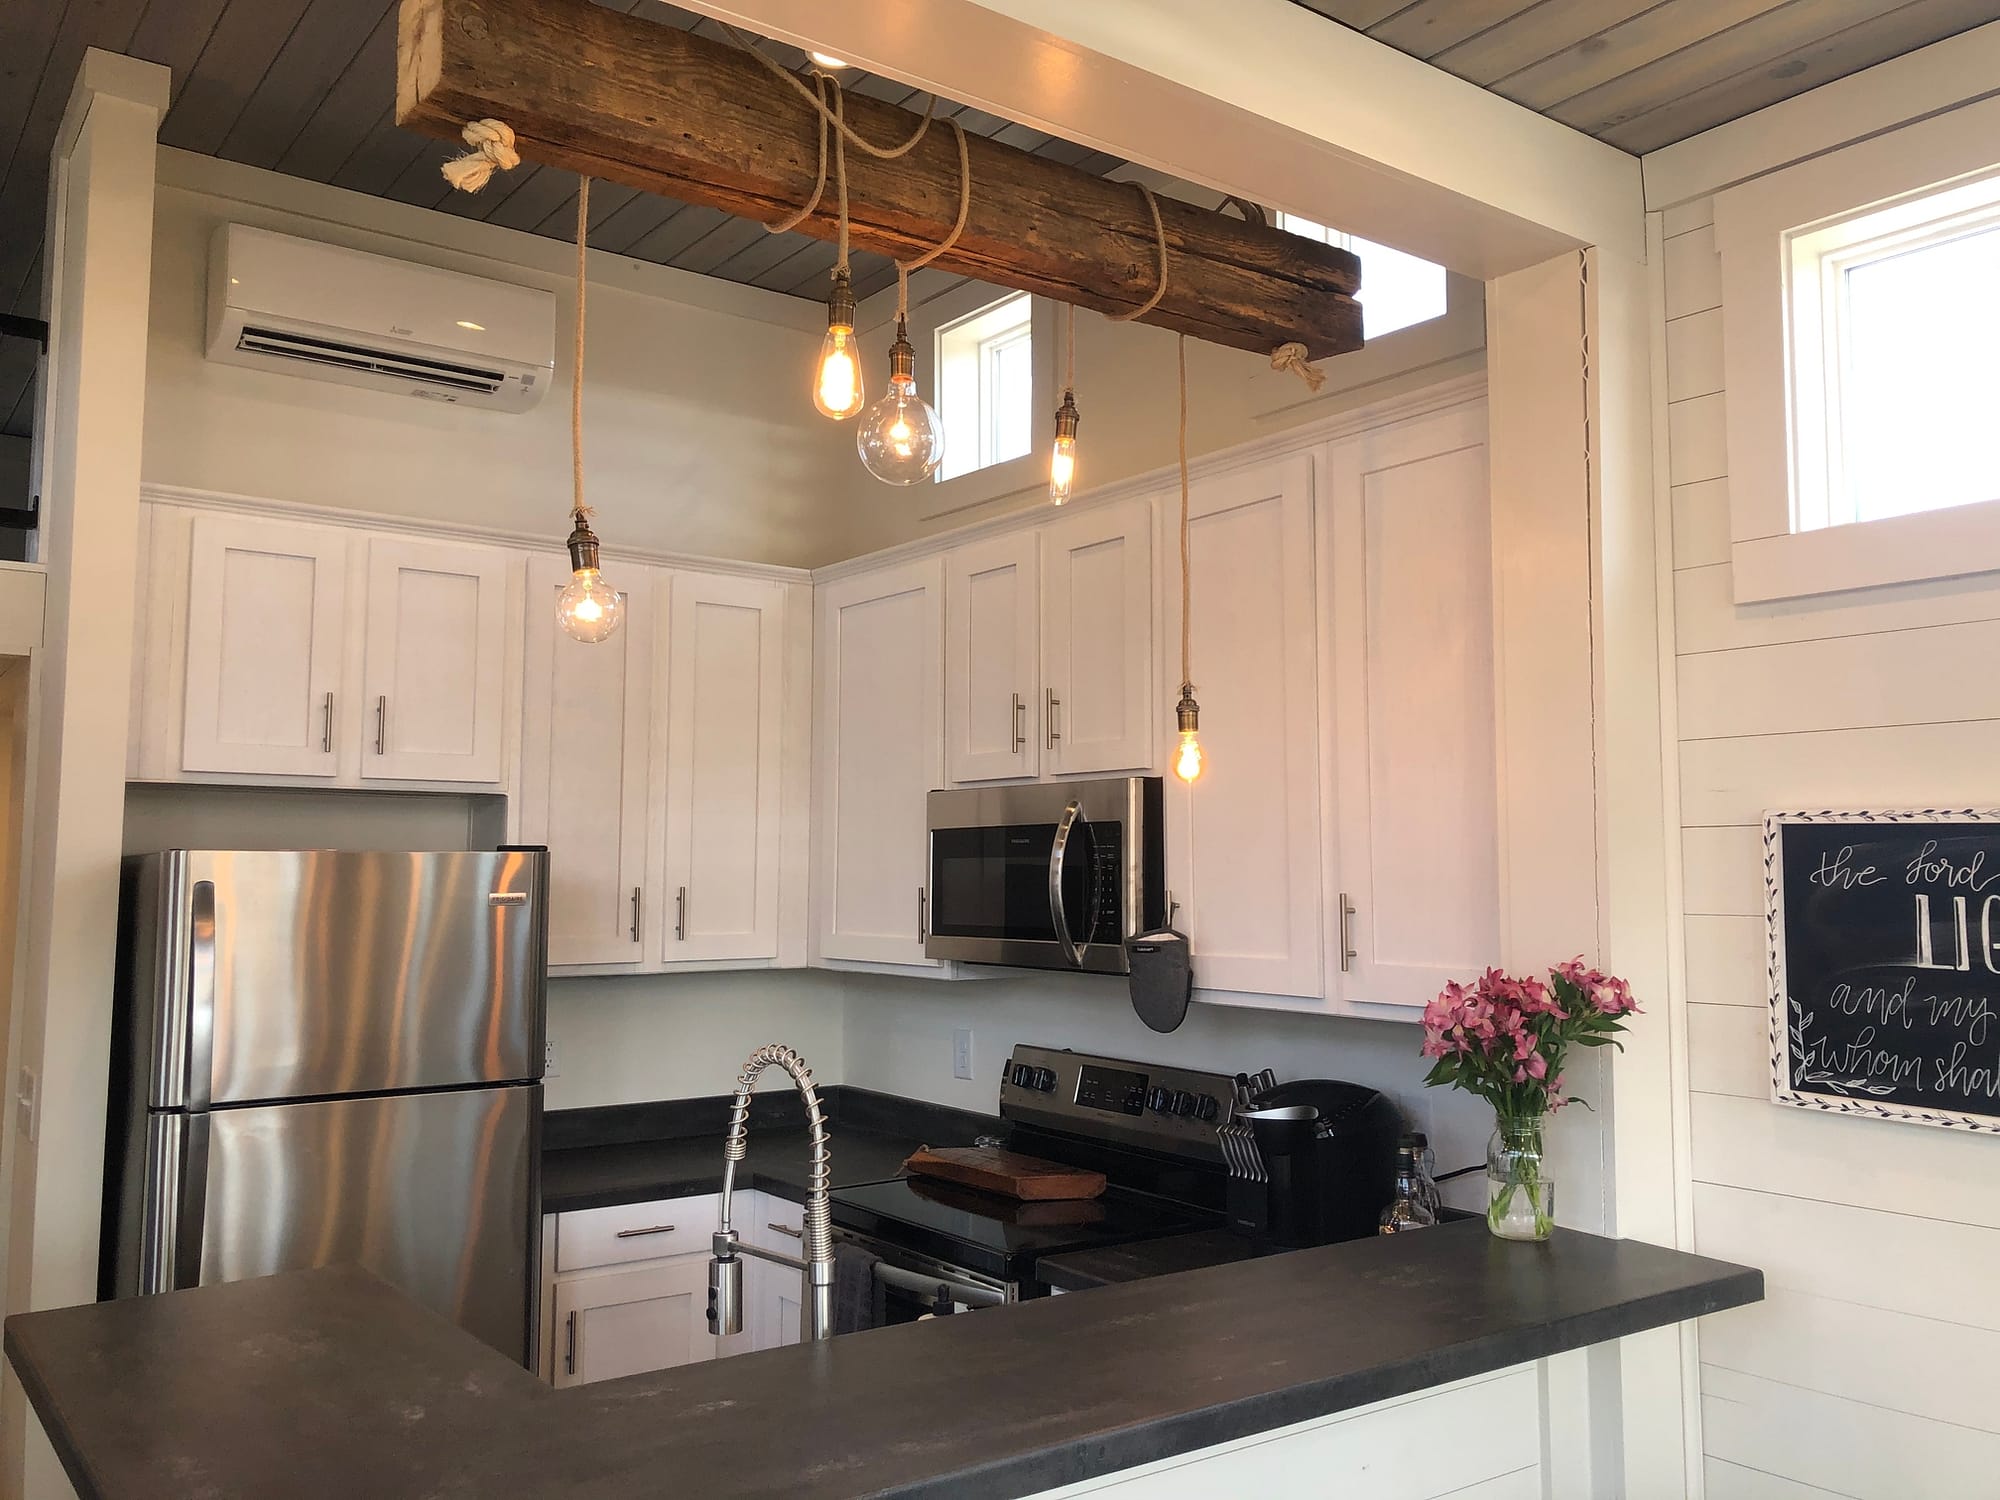 The lighthouse tiny home kitchen